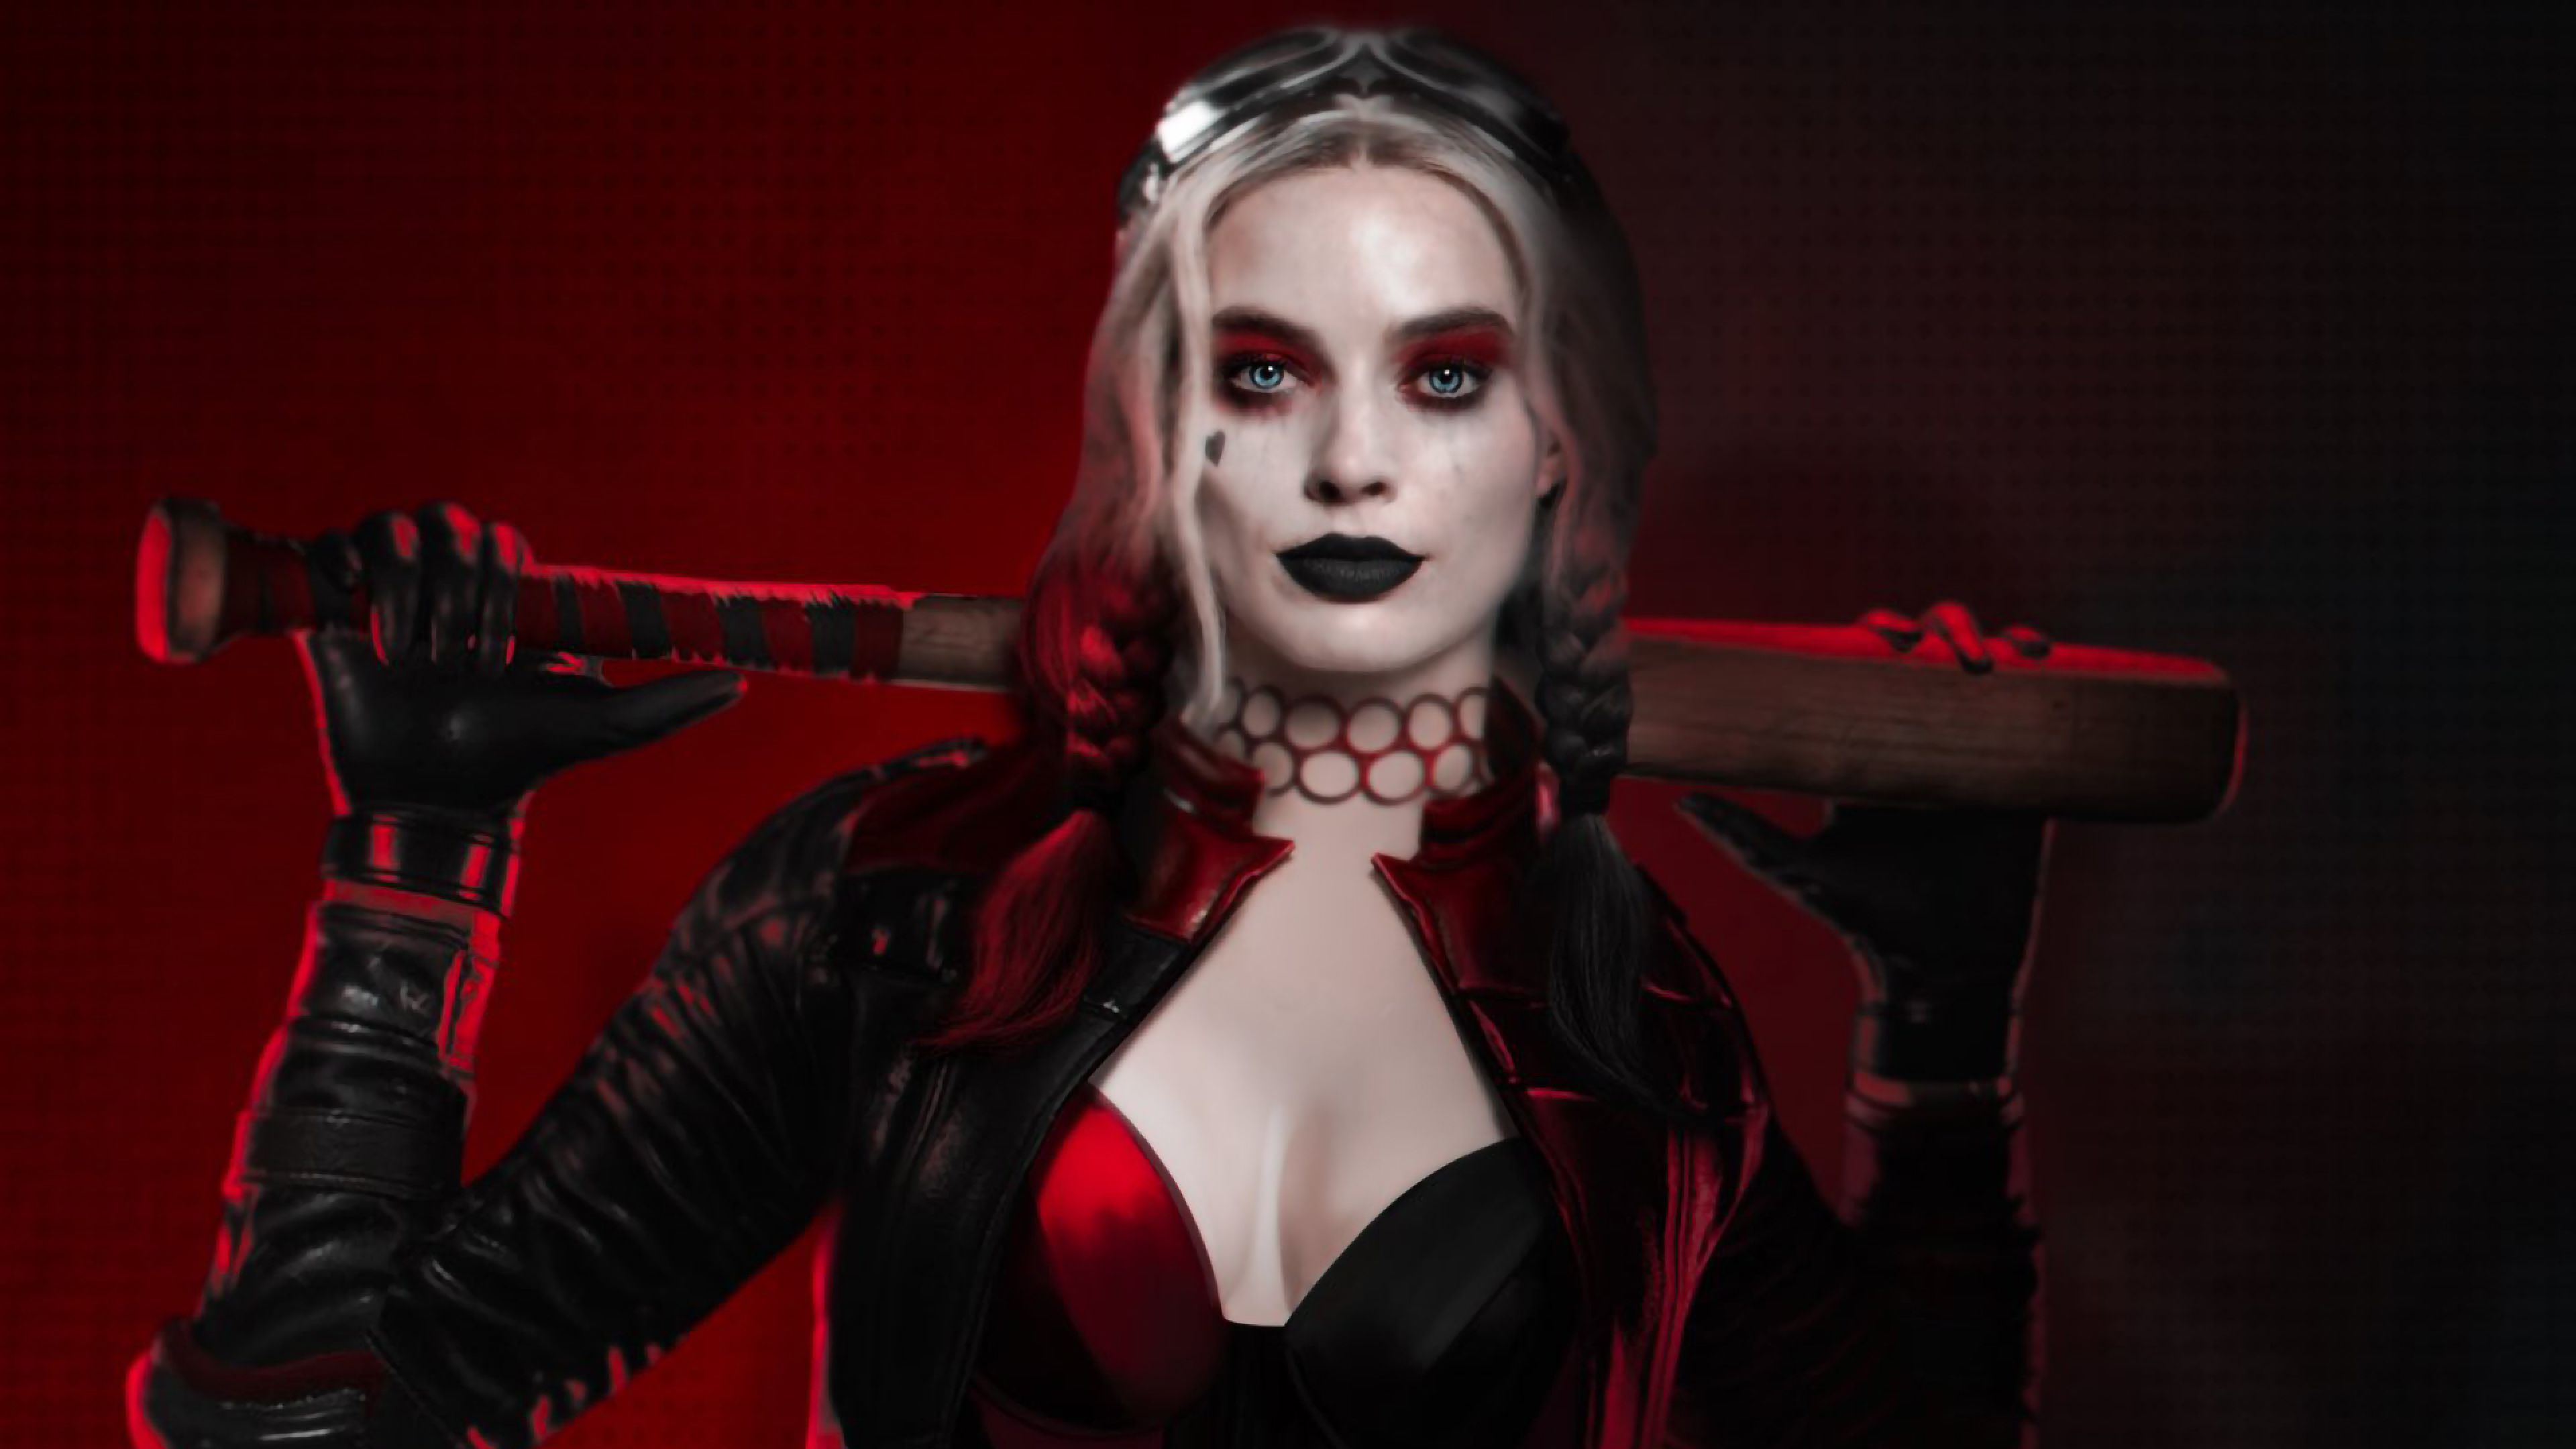 Margot Robbie as Harley Quinn The Suicide Squad 4K Wallpaper, HD Movies 4K Wallpaper, Image, Photo and Background